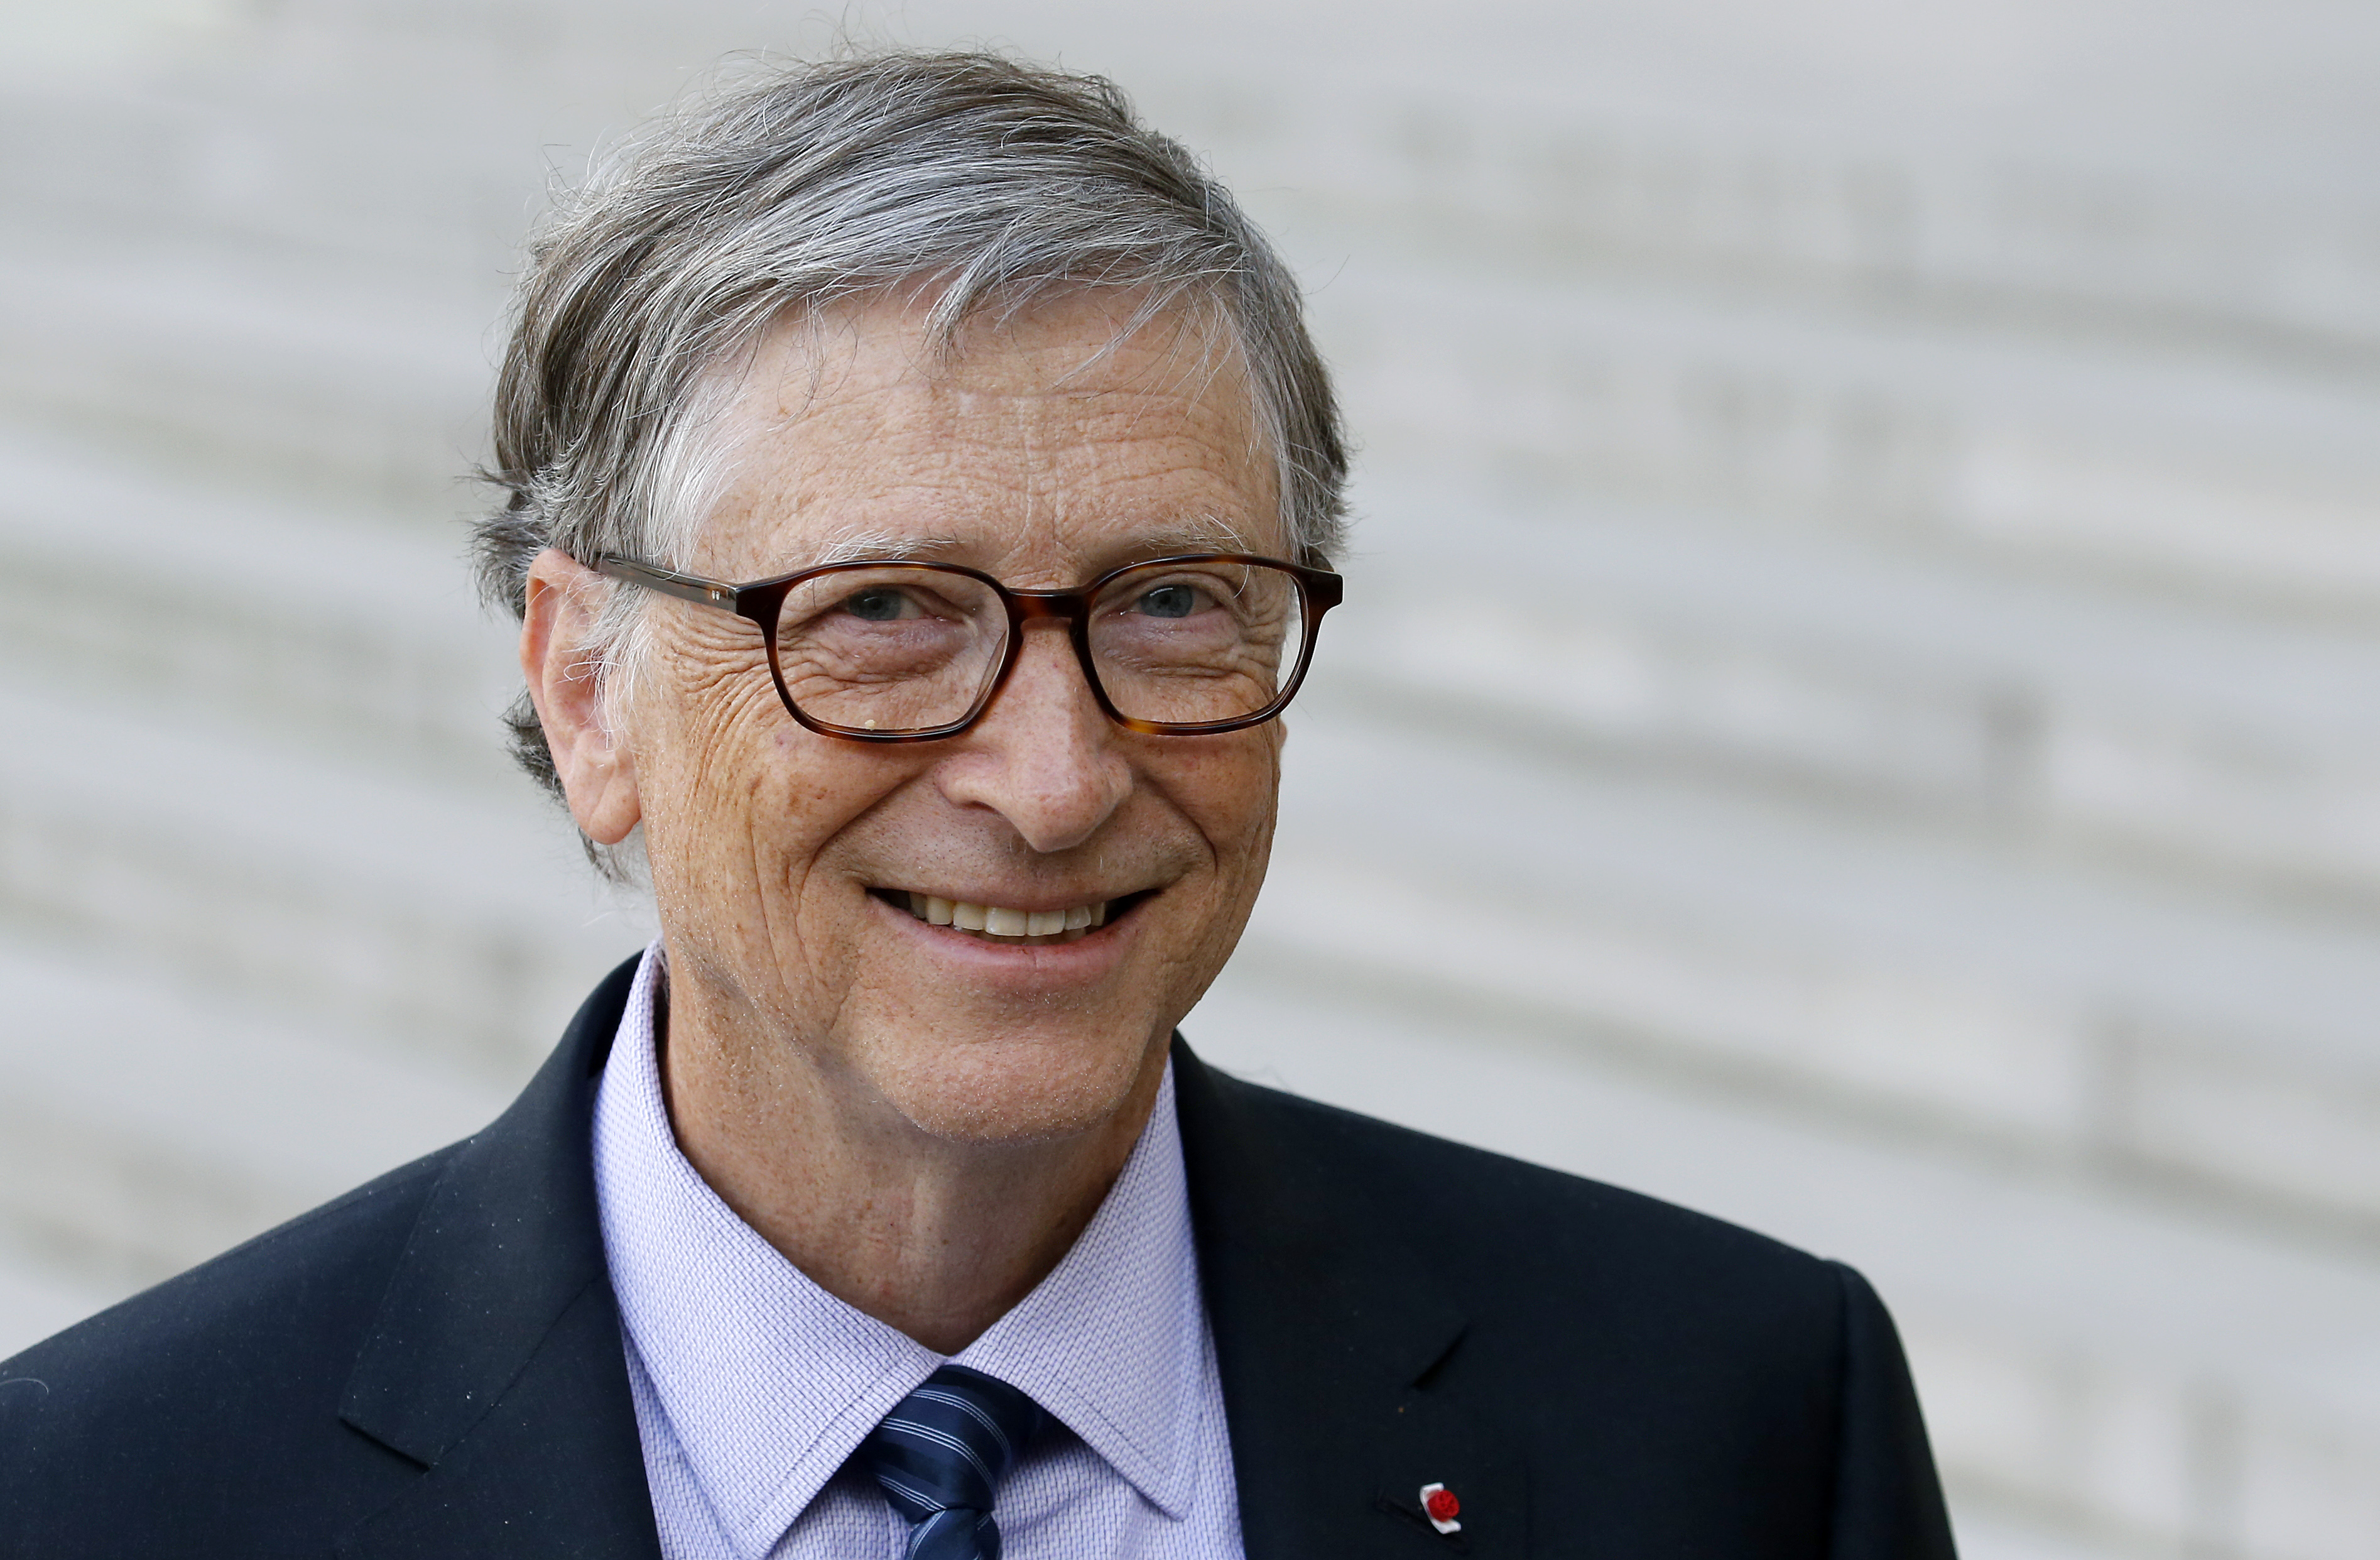 Co-chairman and co-founder of the The Bill and Melinda Gates Foundation, Bill Gates  speaks to the media after his meeting with French president Emmanuel Macron at the Elysee Palace on April 16, 2018 in Paris, France. (Chesnot—Getty Images)